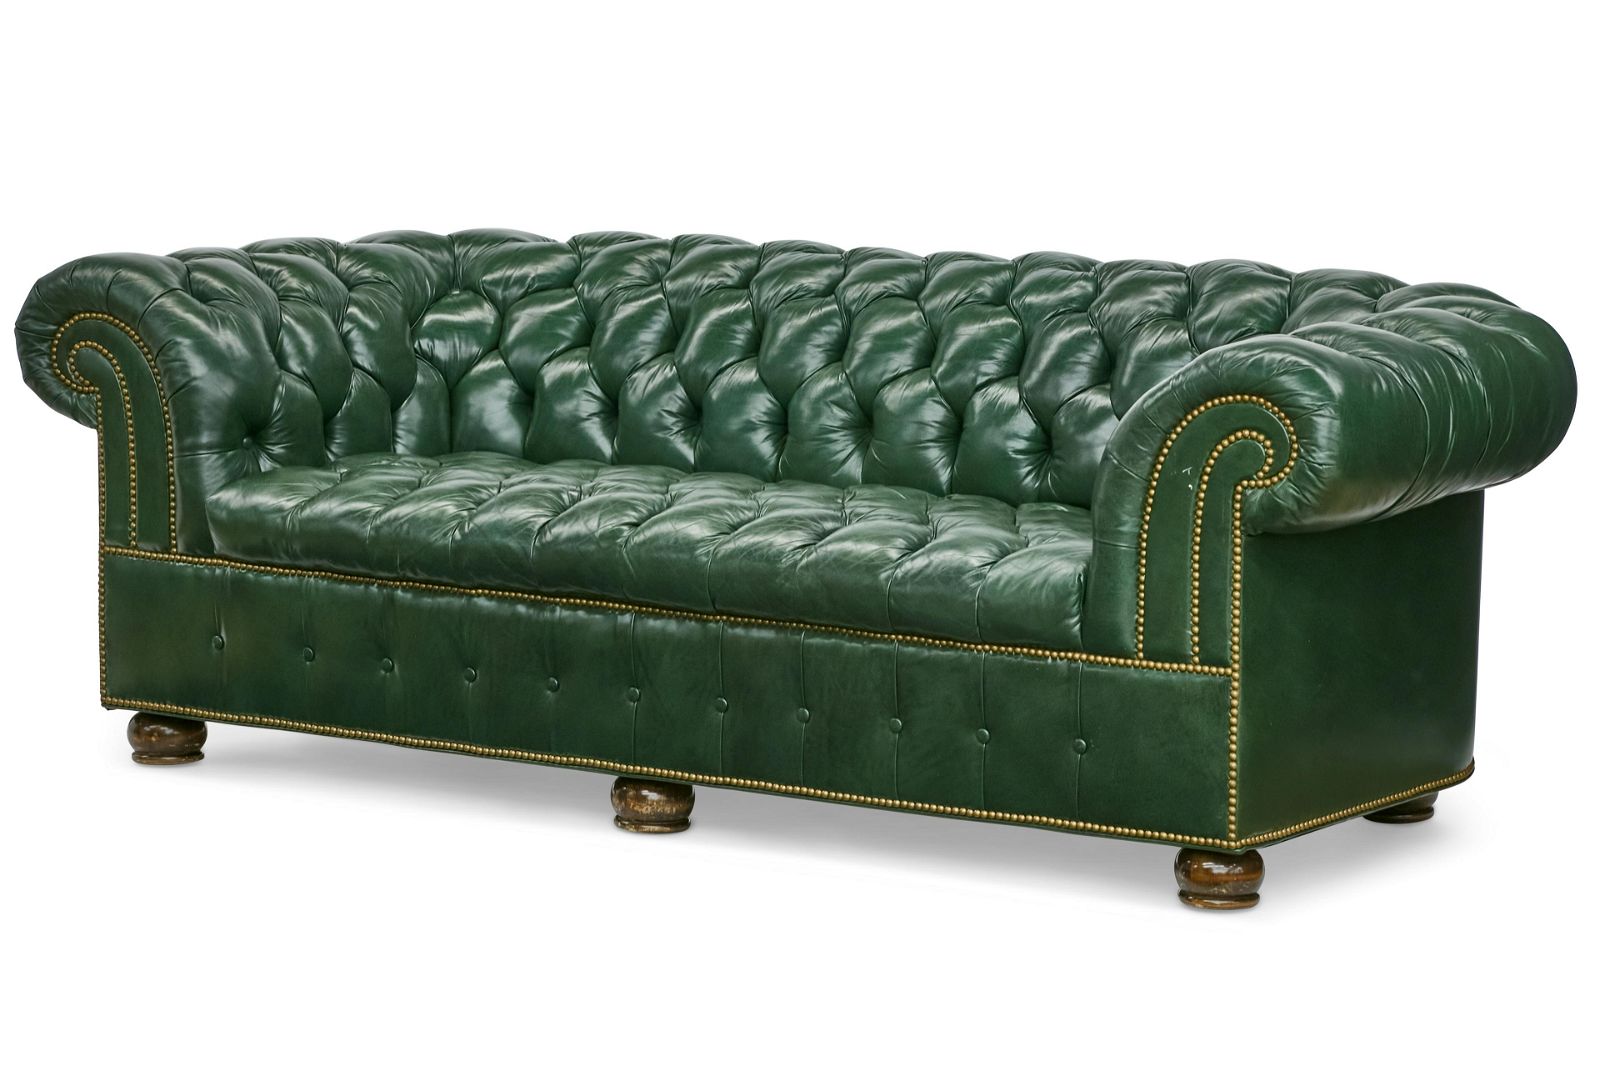 A GREEN TUFTED LEATHER CHESTERFIELD